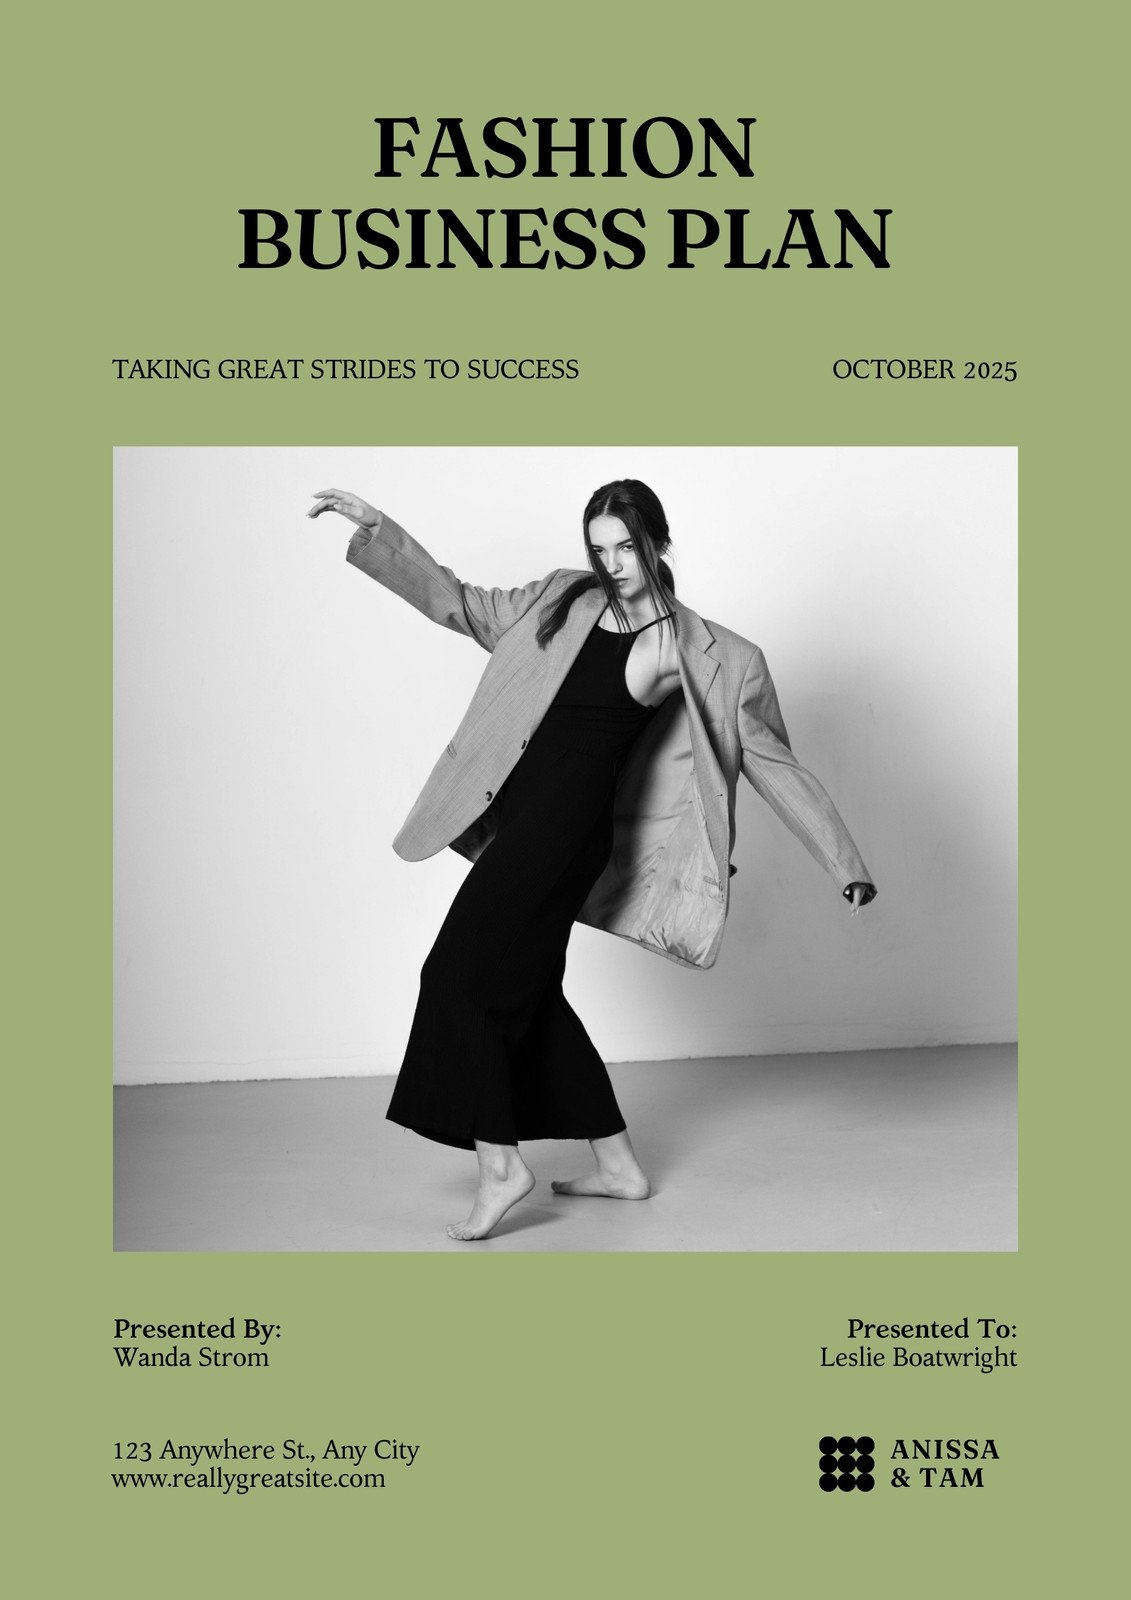 example of a fashion business plan